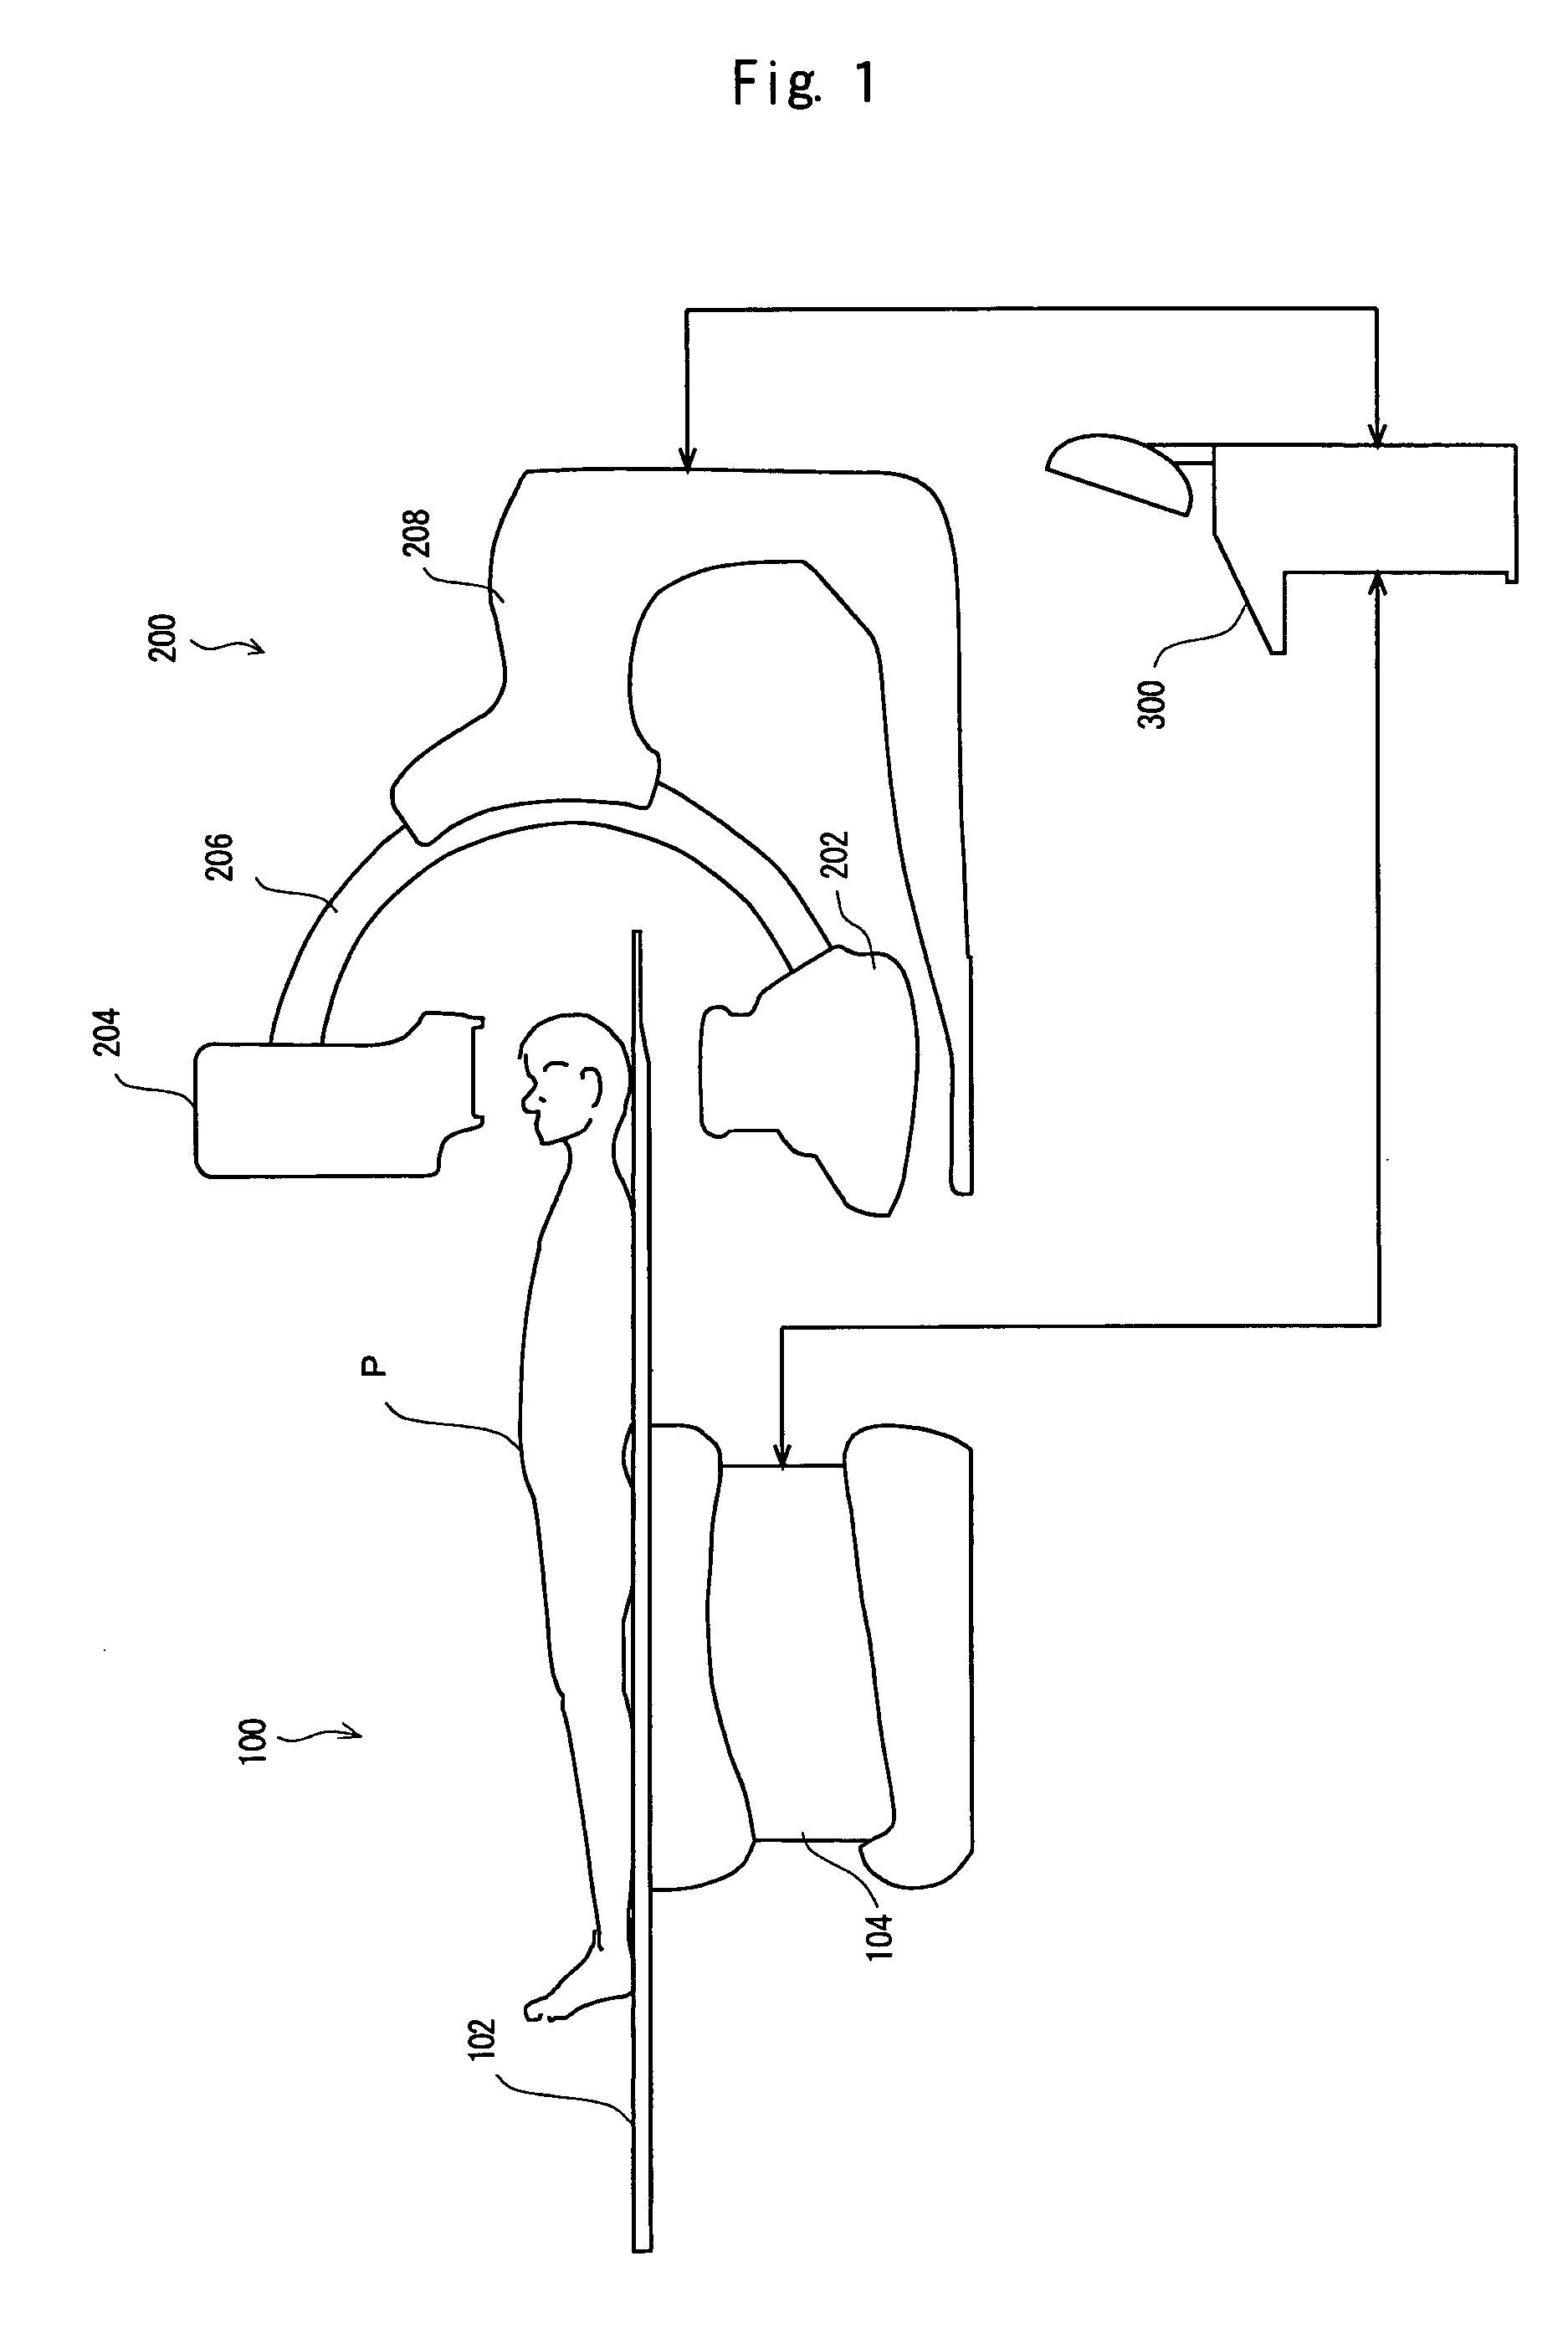 Proximity detector and radiography system